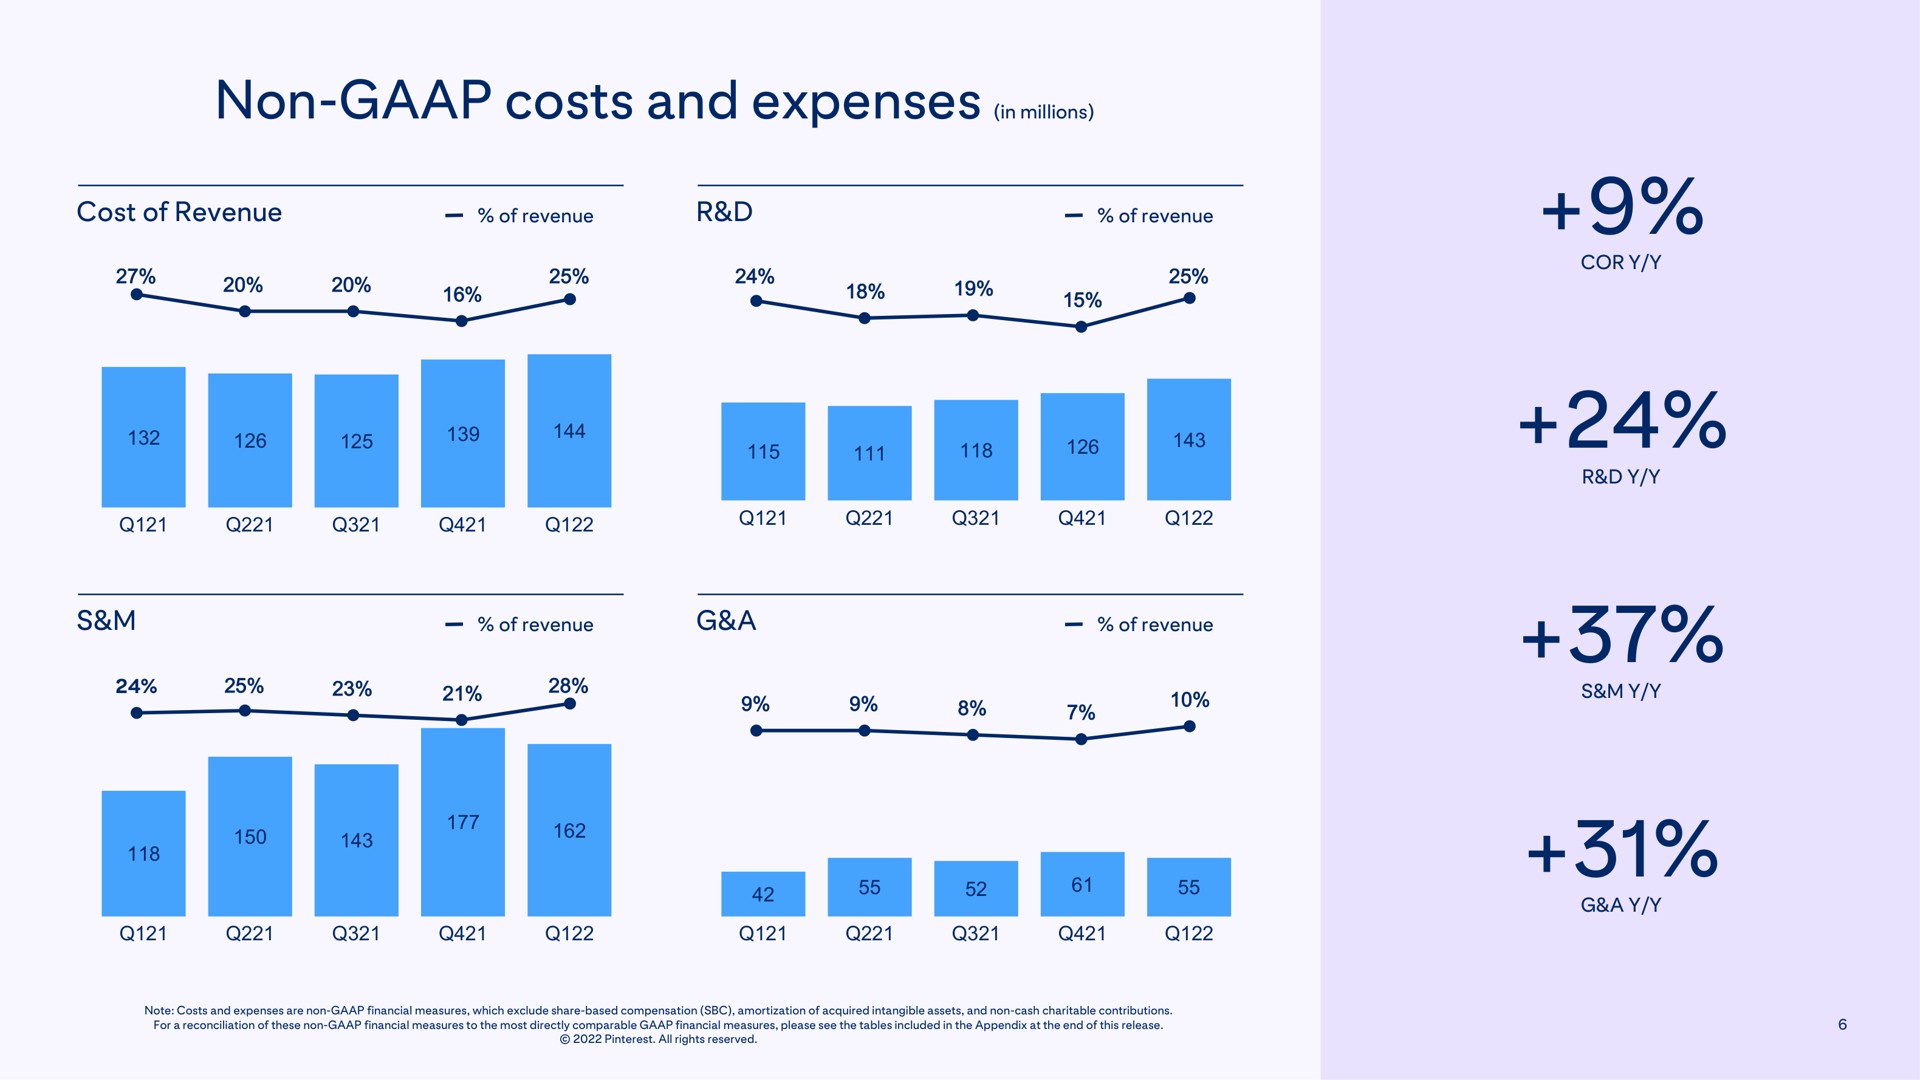 non costs and expenses in millions | Pinterest